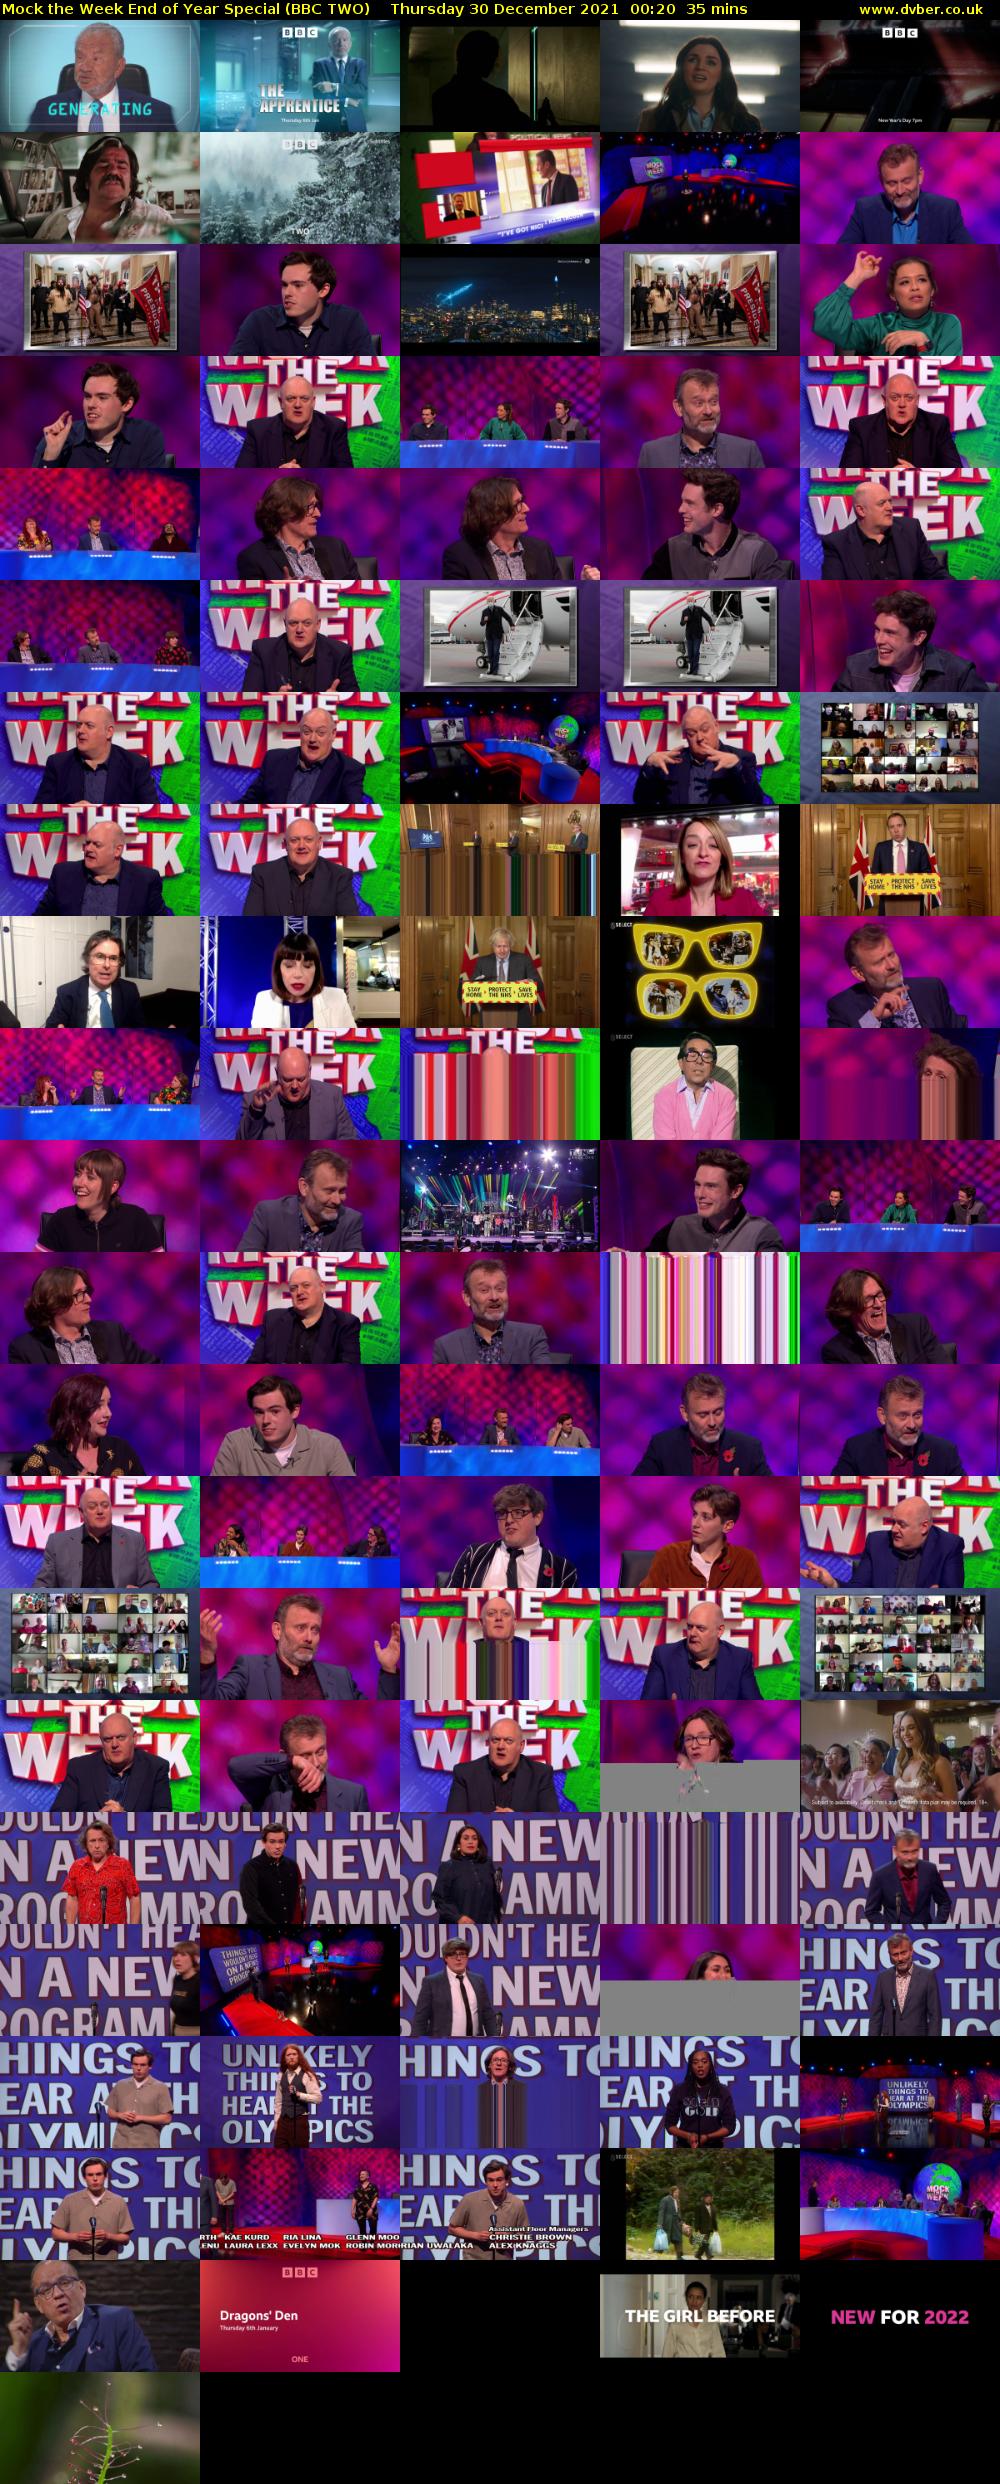 Mock the Week End of Year Special (BBC TWO) Thursday 30 December 2021 00:20 - 00:55